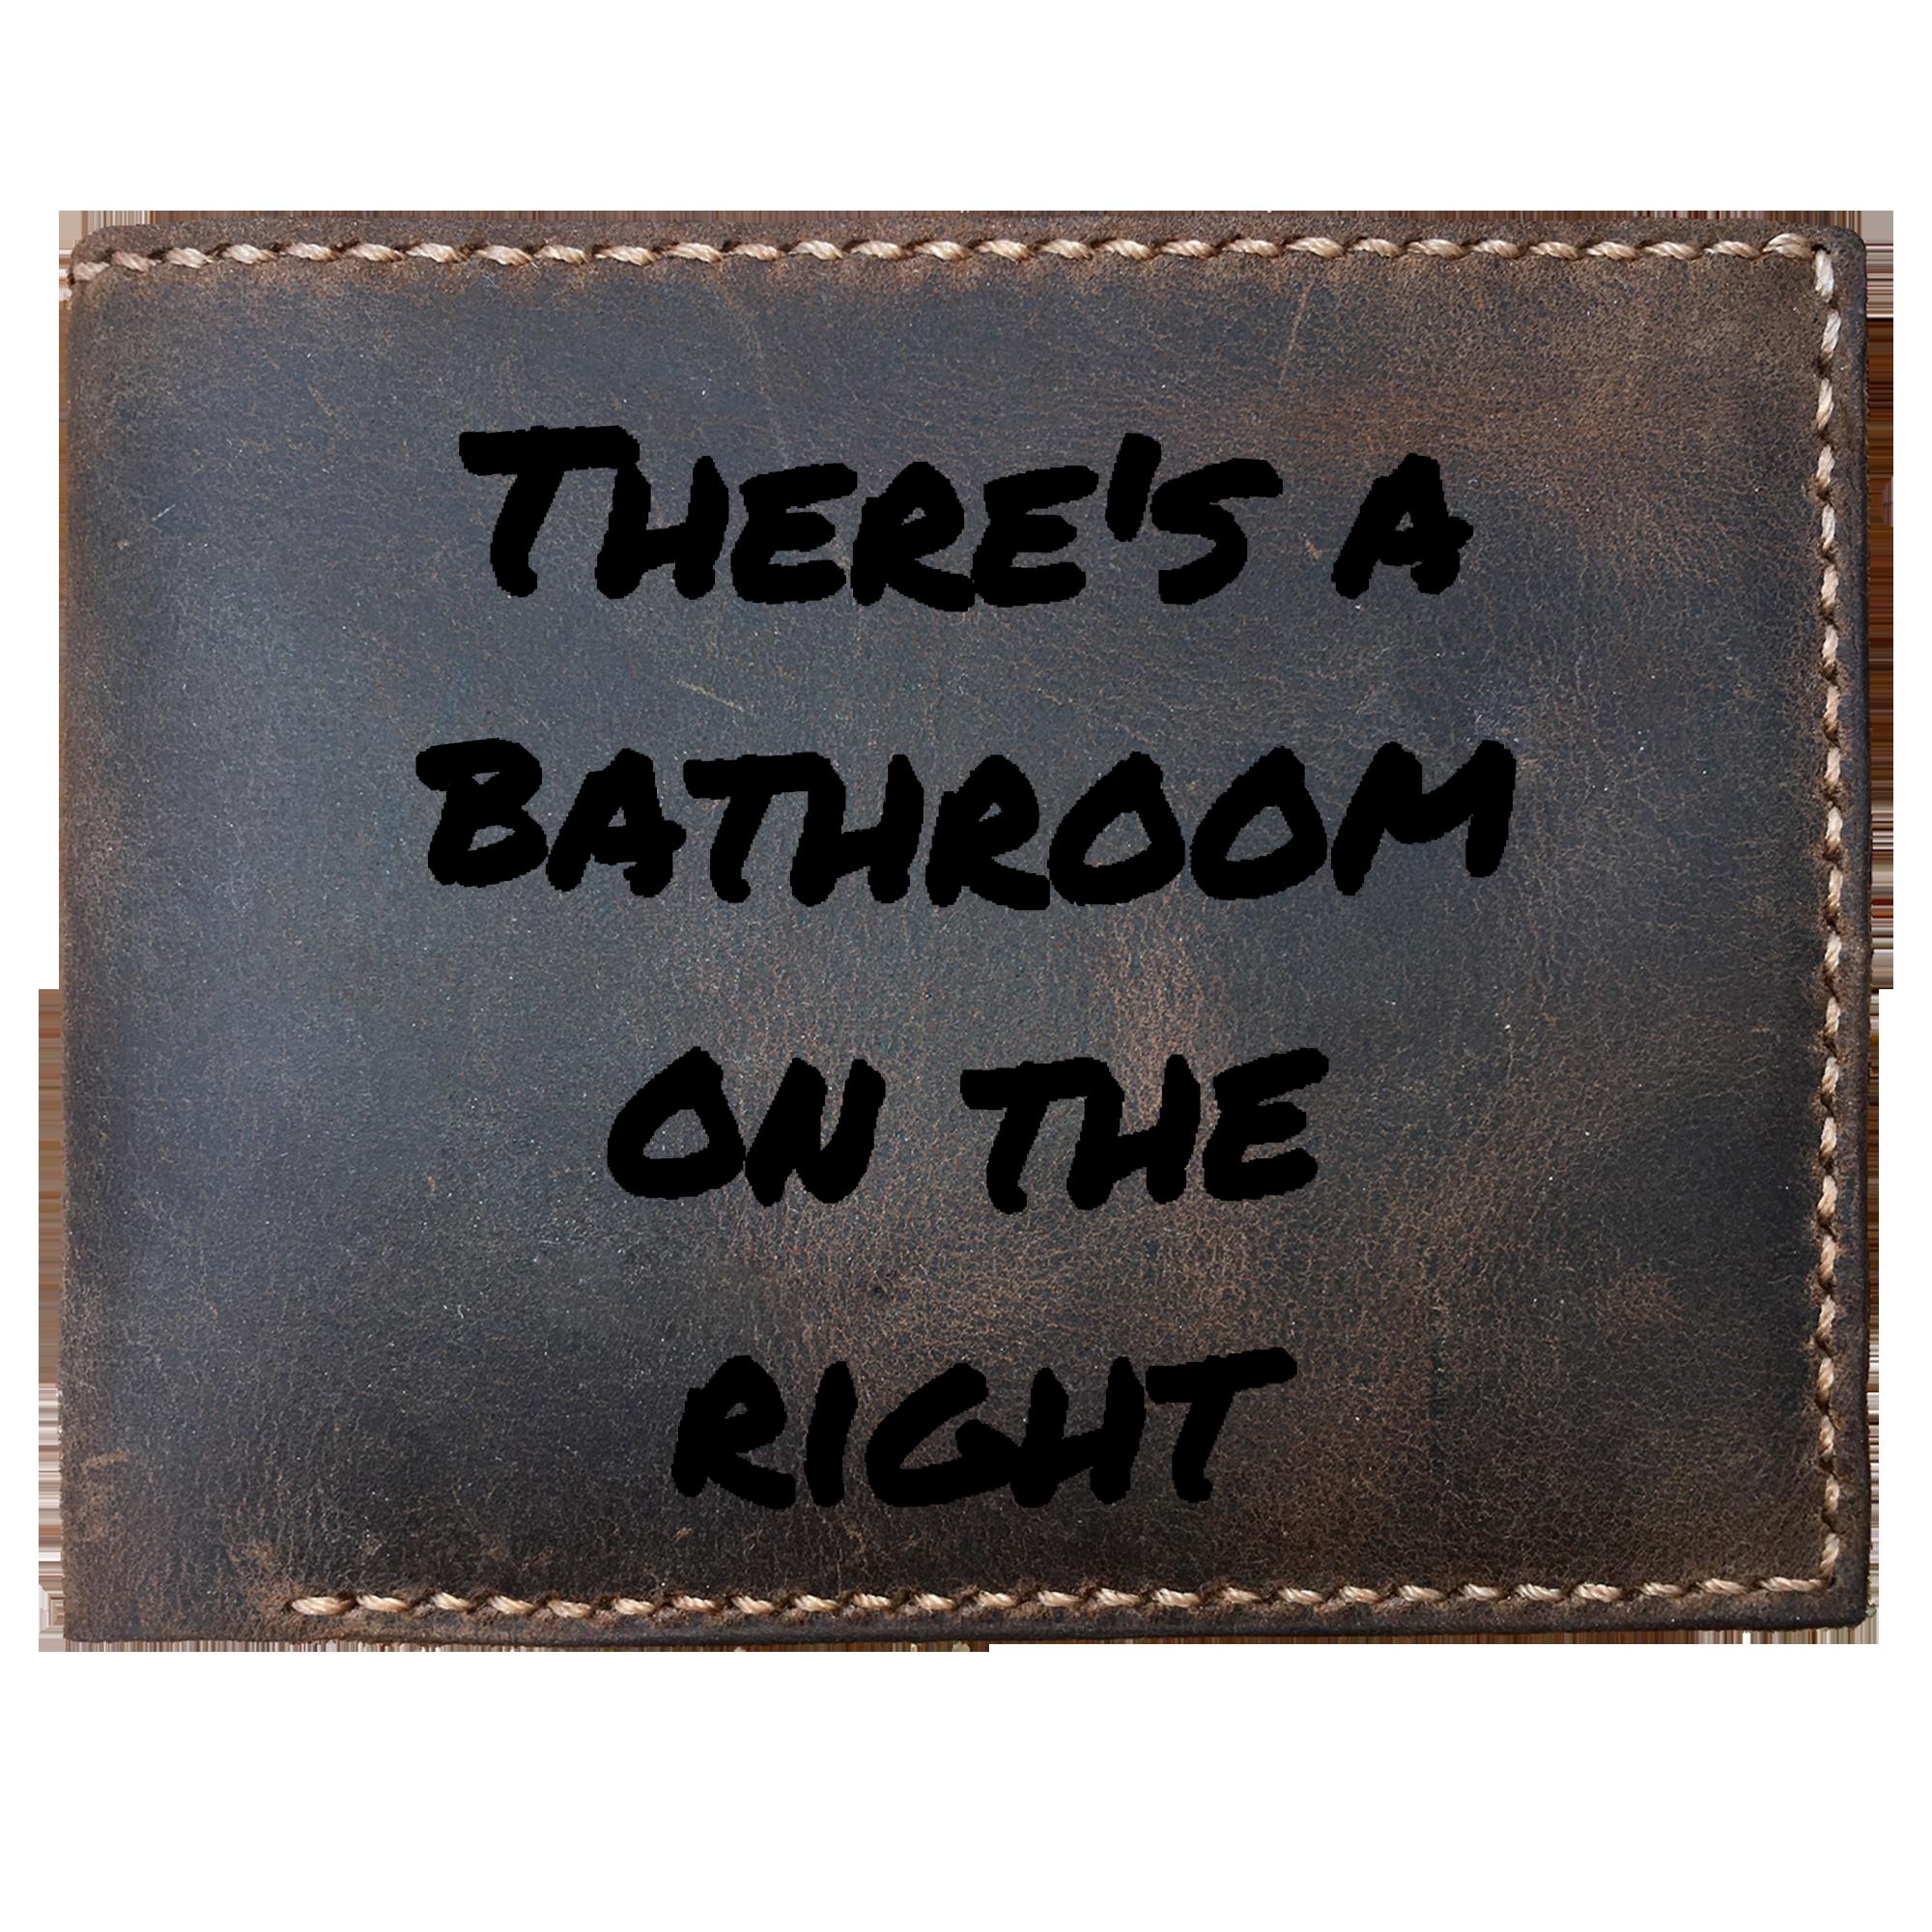 Skitongifts Funny Custom Laser Engraved Bifold Leather Wallet For Men, There's A Bathroom On The Right